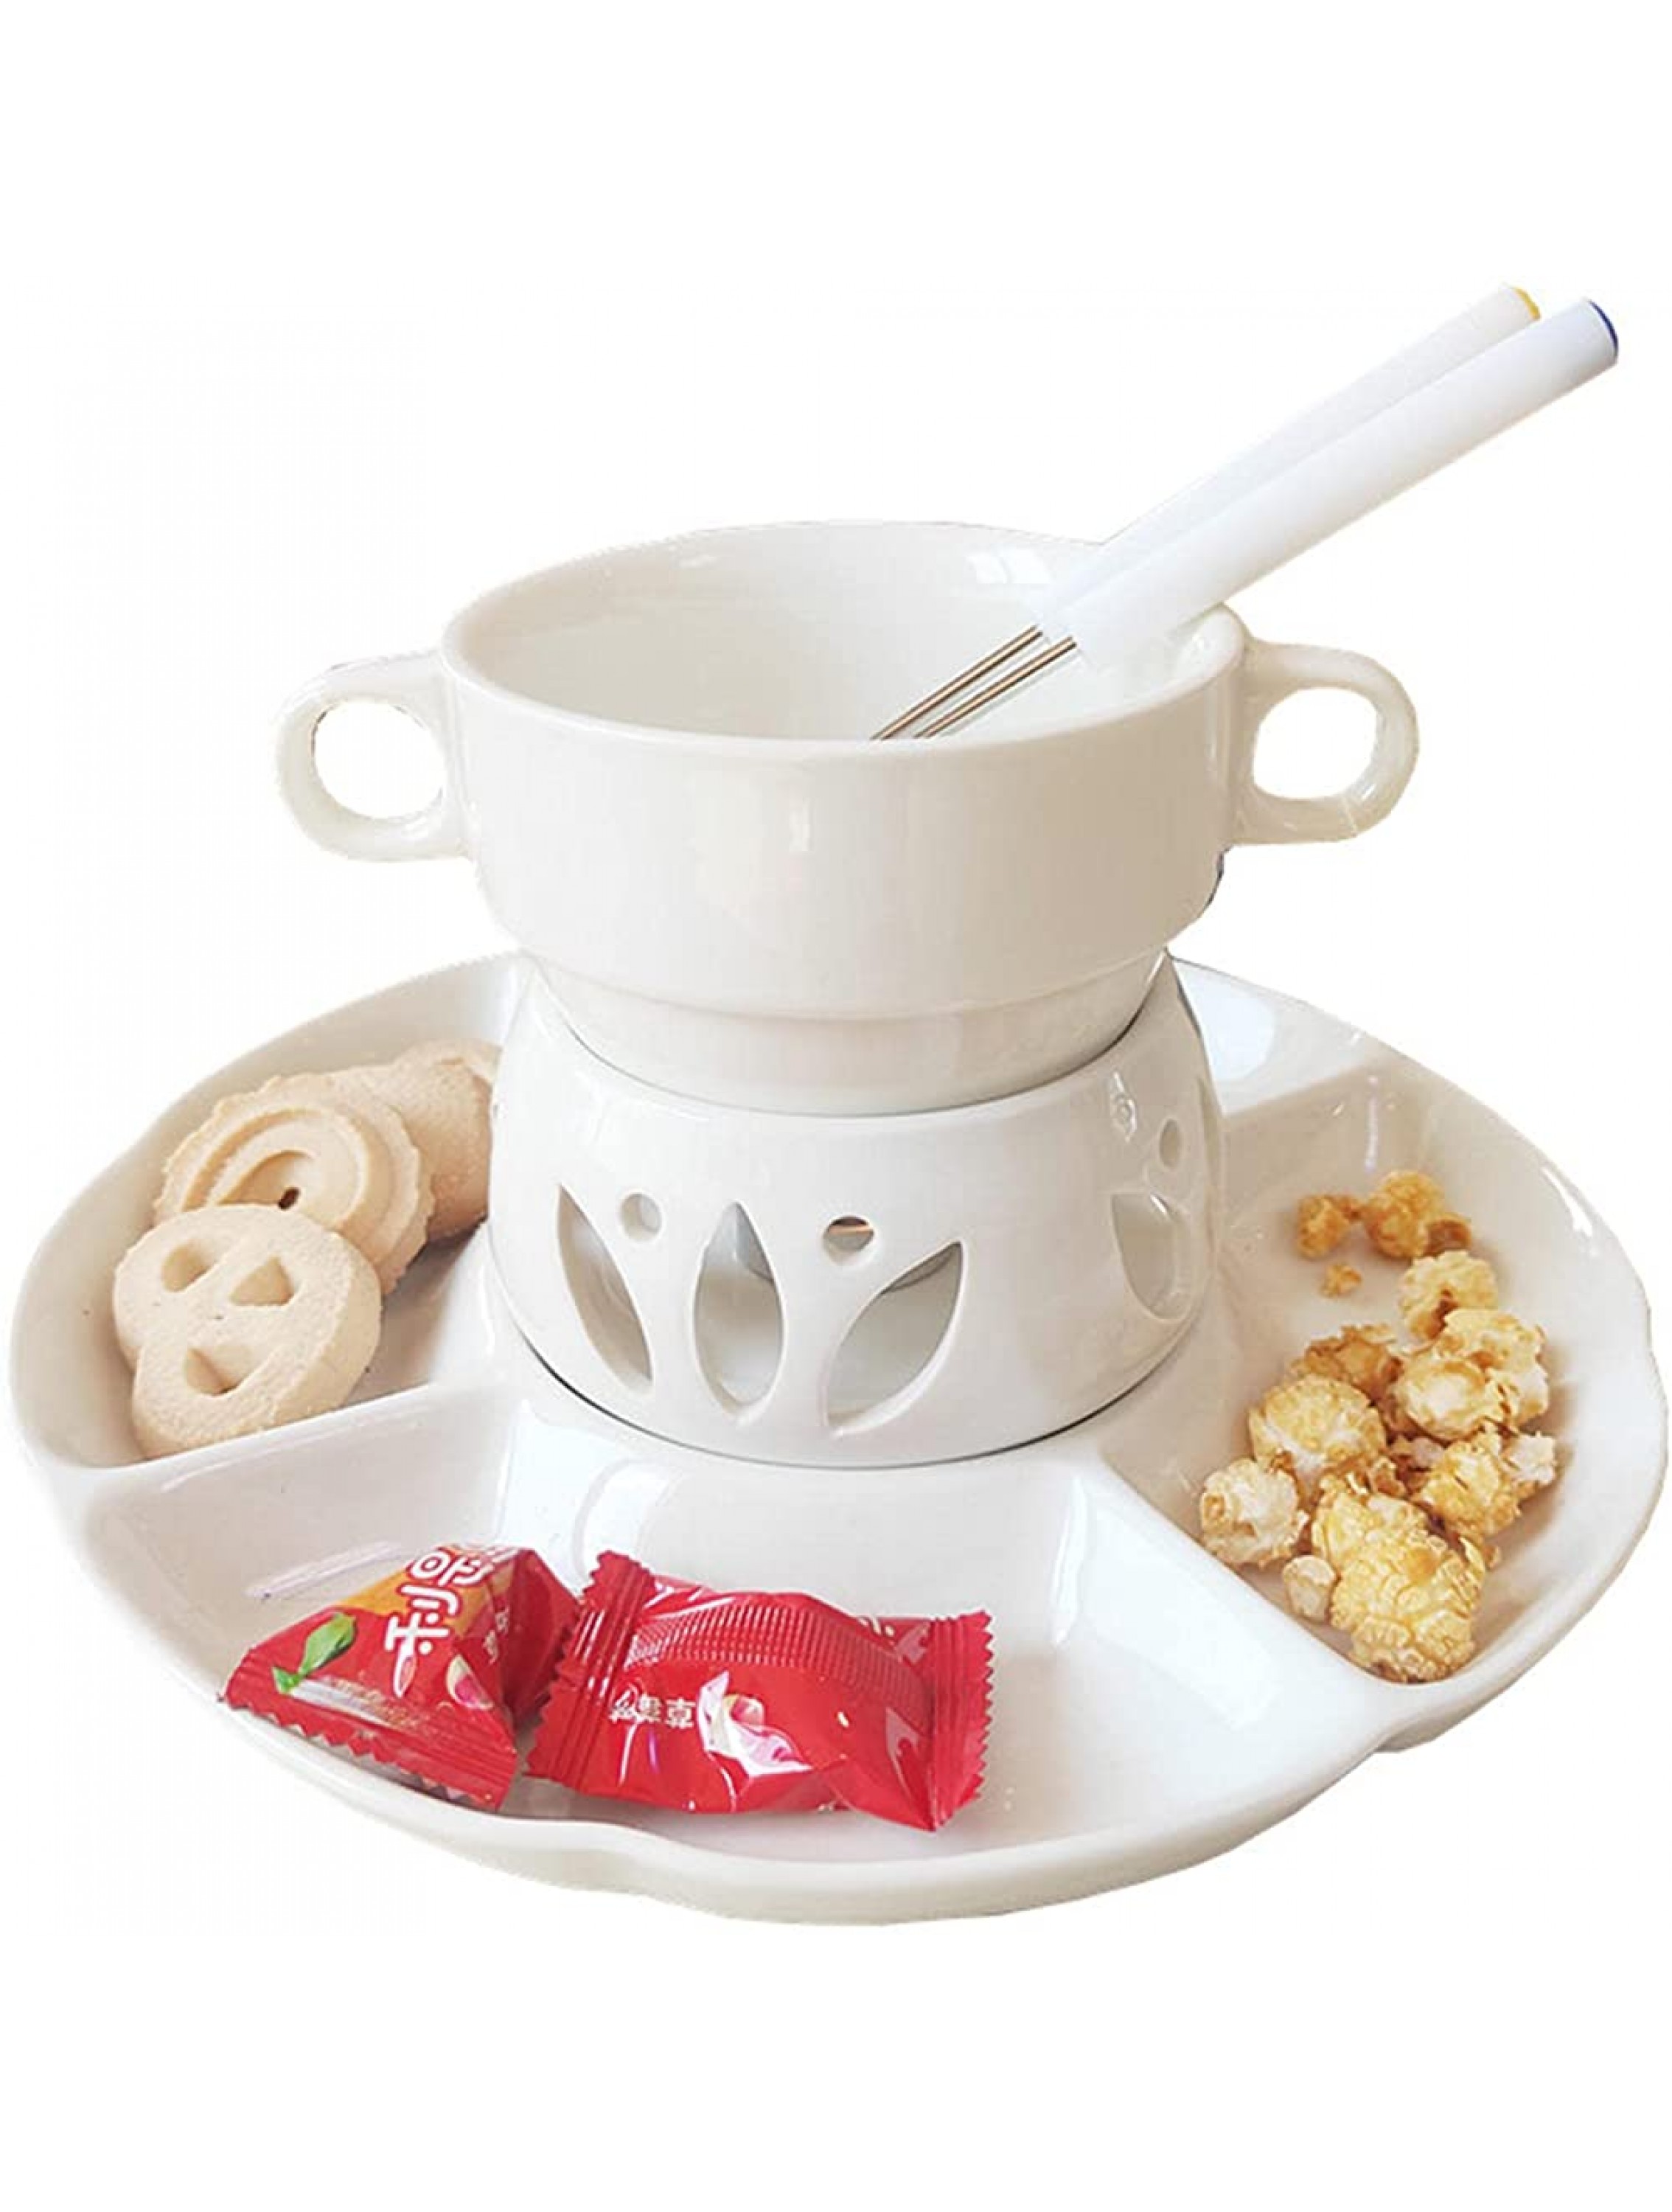 Cheese fondue,Cheese fondue set,Fondue Pot Set,Cheese Fondue Party Set,Fondue Set,Glazed Ceramic Fondue Pot For Cheese or Chocolate,Tapas,Butter Warmer Set.Various styles of cheese fondue set - B8Y7NPF49